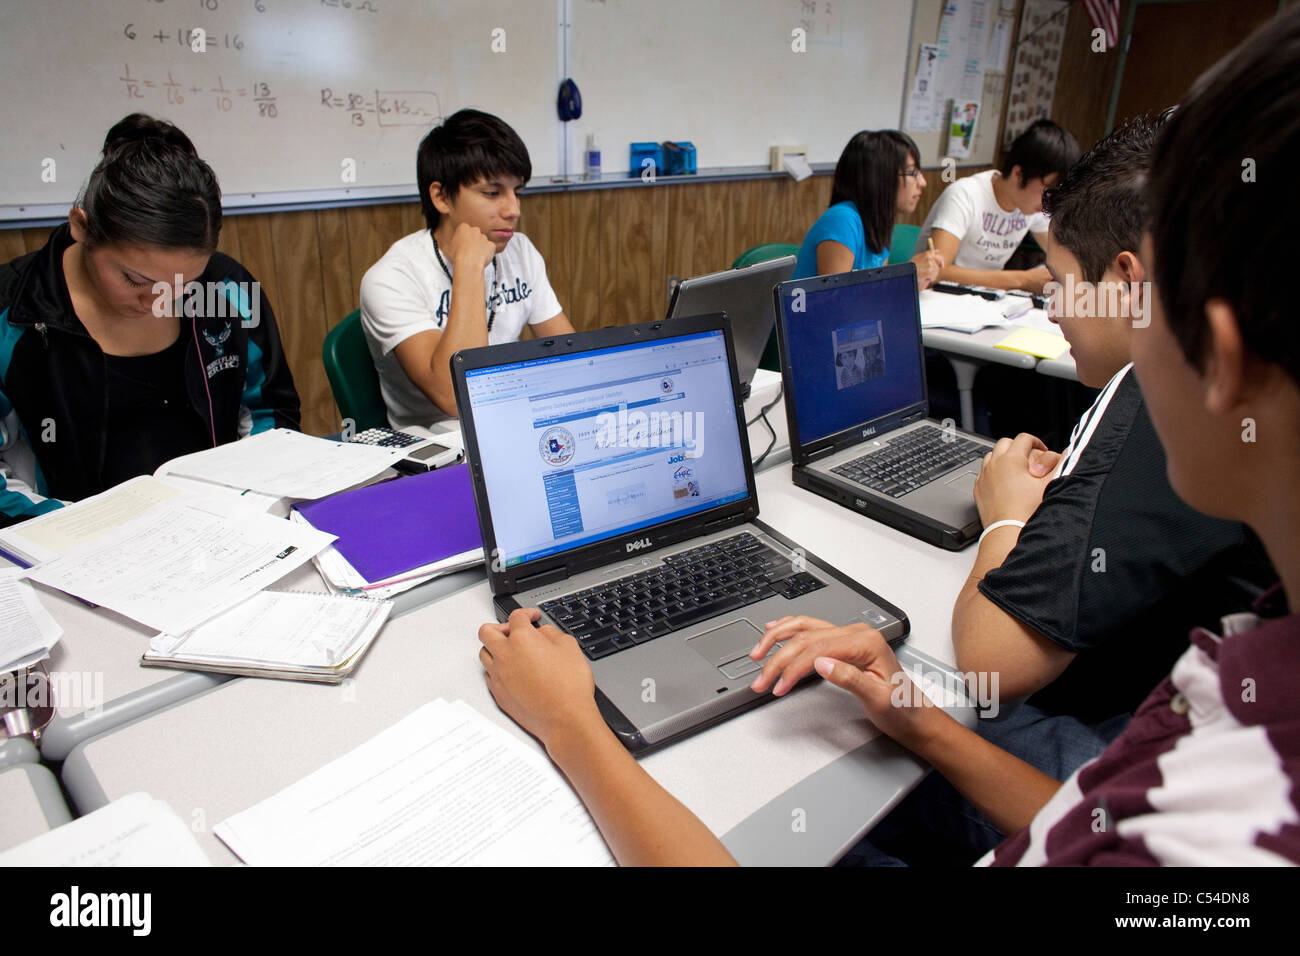 Students use notebooks and laptop computers inside classroom of high school in El Paso, Texas Stock Photo